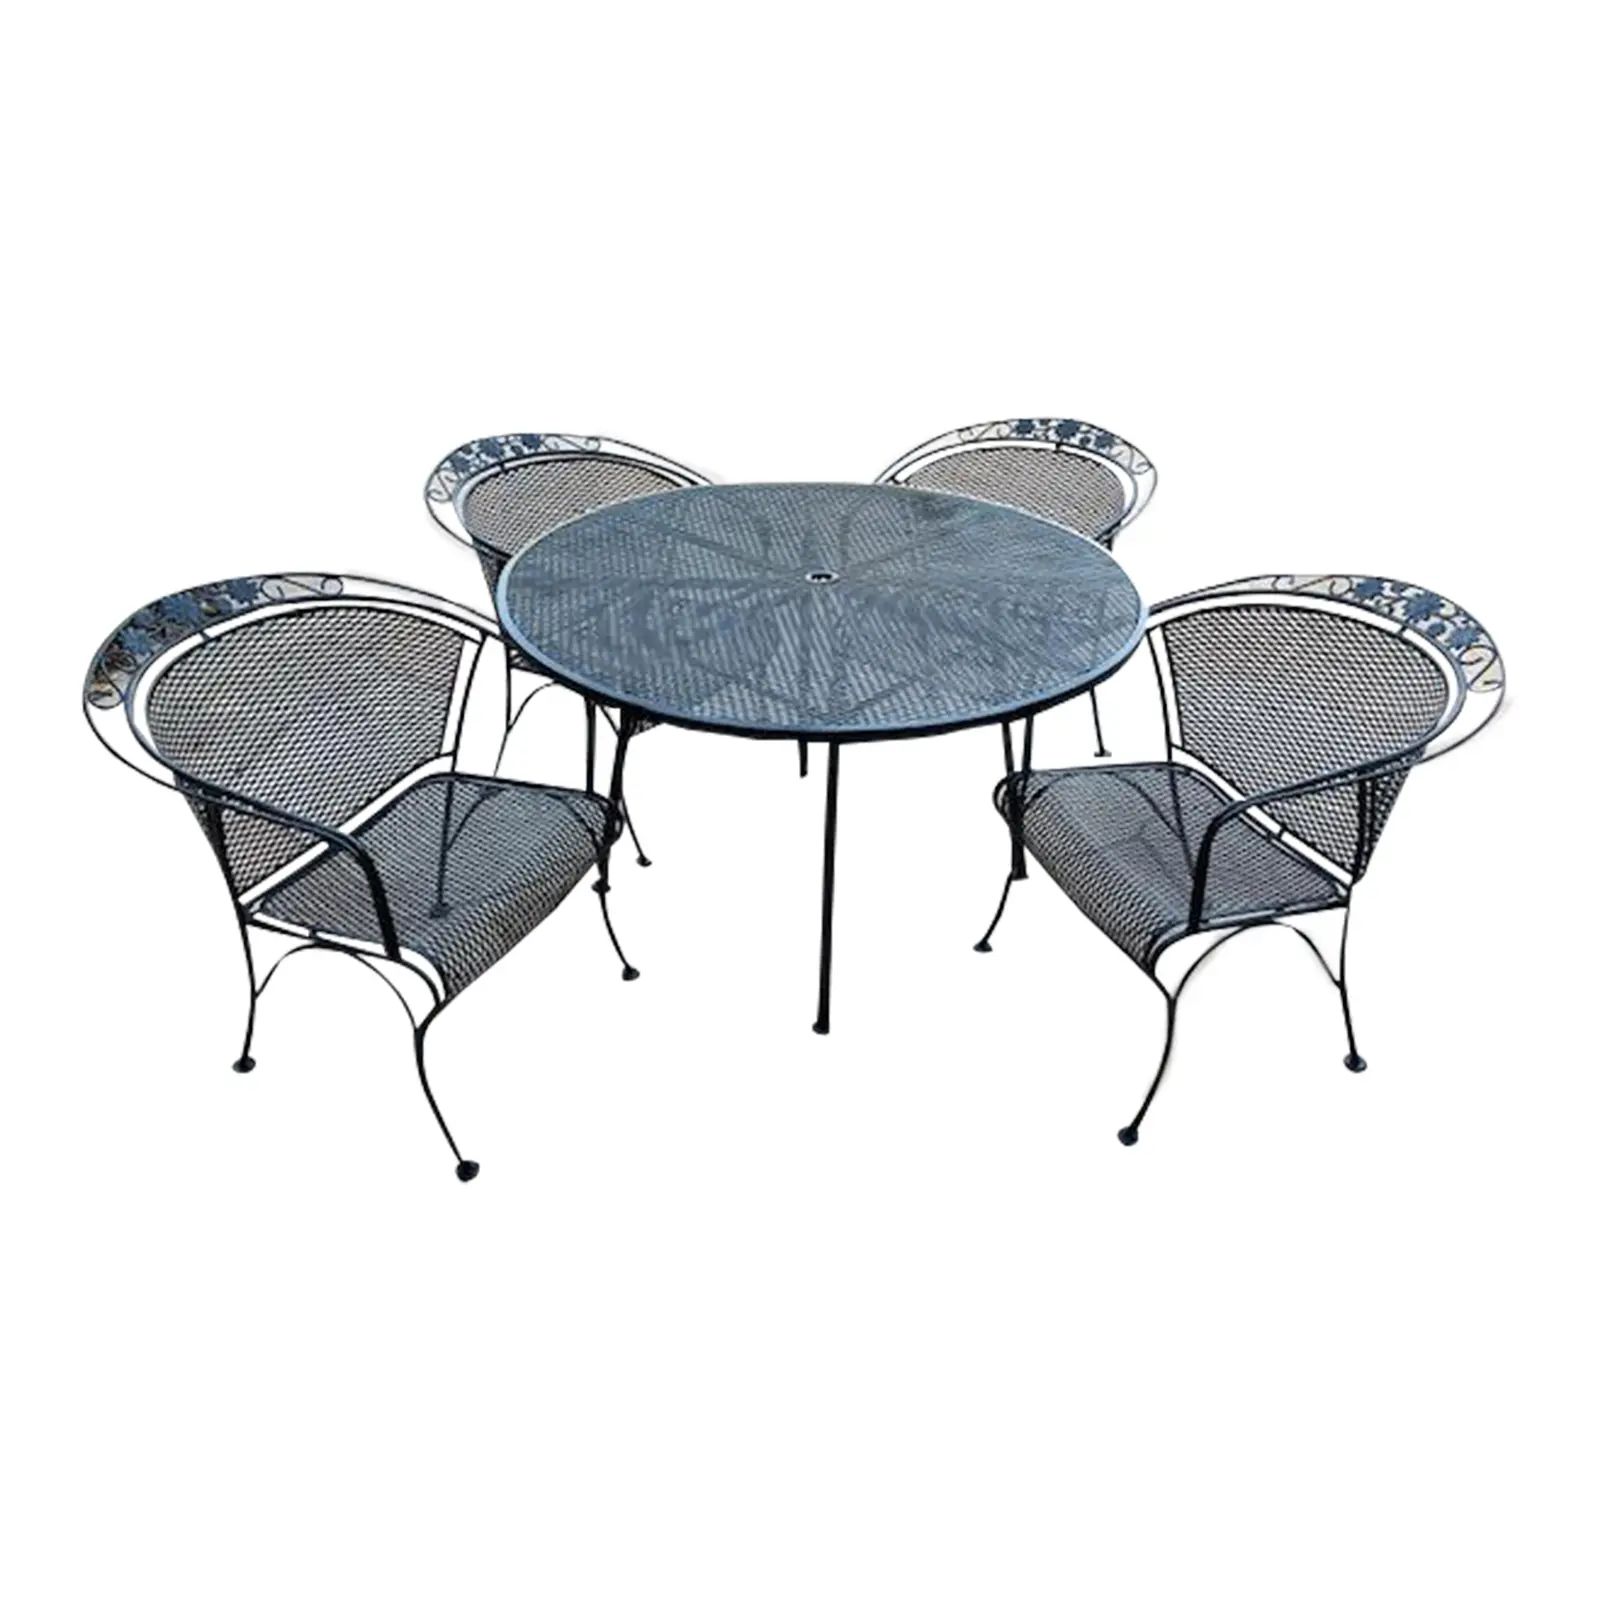 Vintage Woodard Briarwood “Daisy” Wrought Iron Outdoor Table & 4 Chairs | Chairish